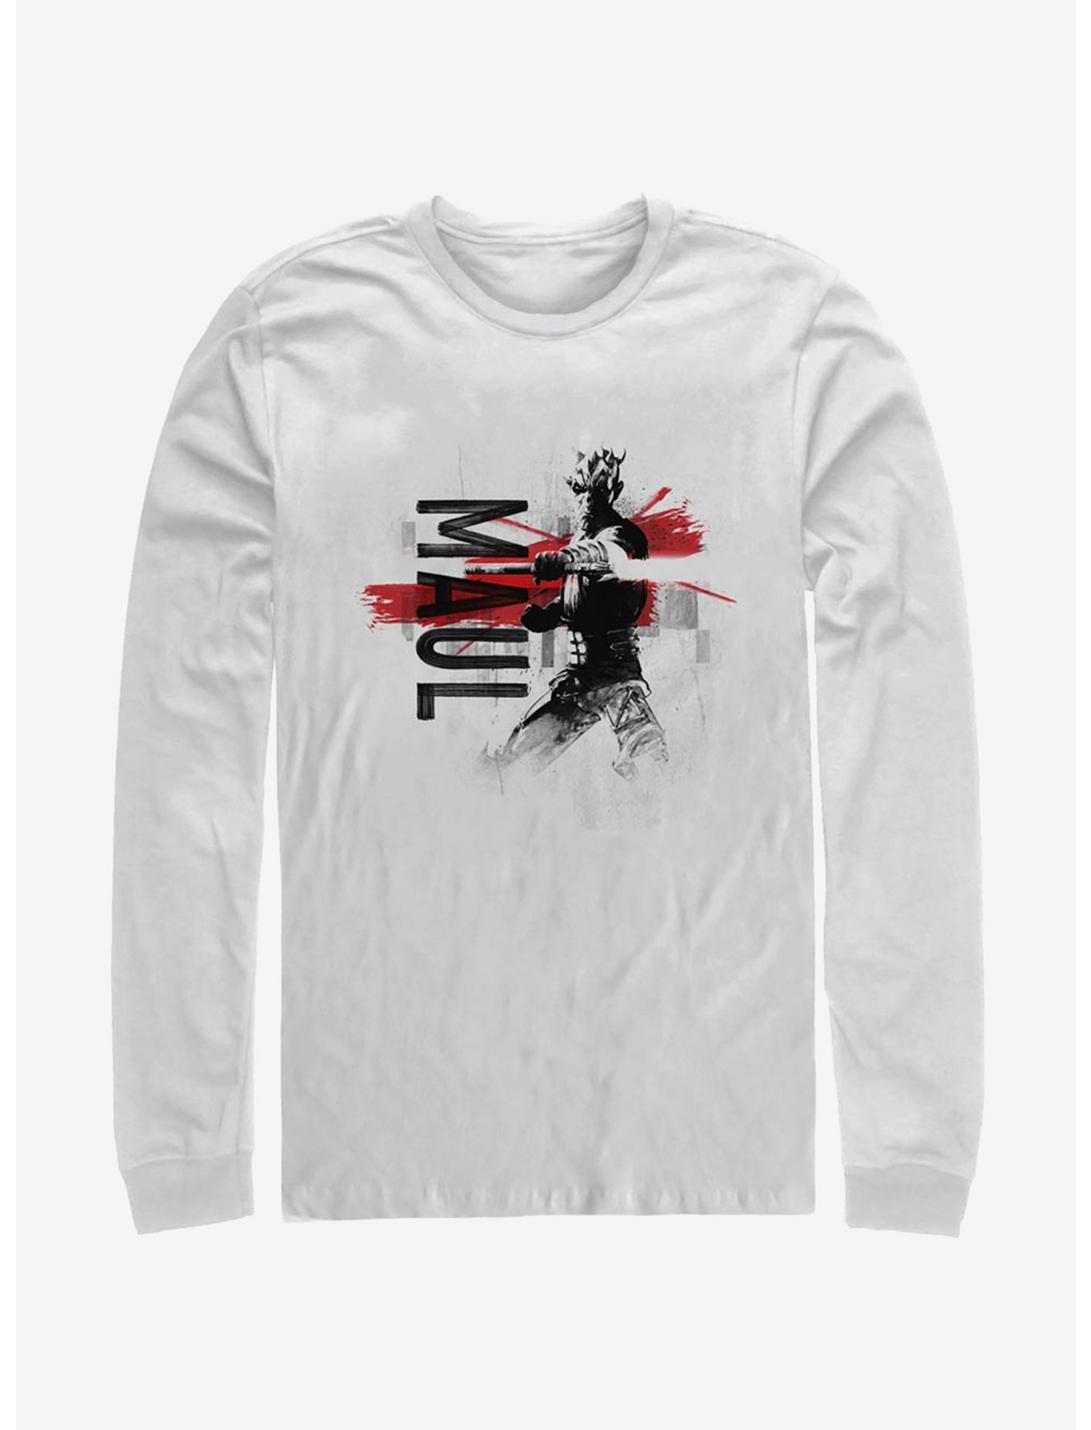 Star Wars The Clone Wars Maul Collage Long-Sleeve T-Shirt, WHITE, hi-res